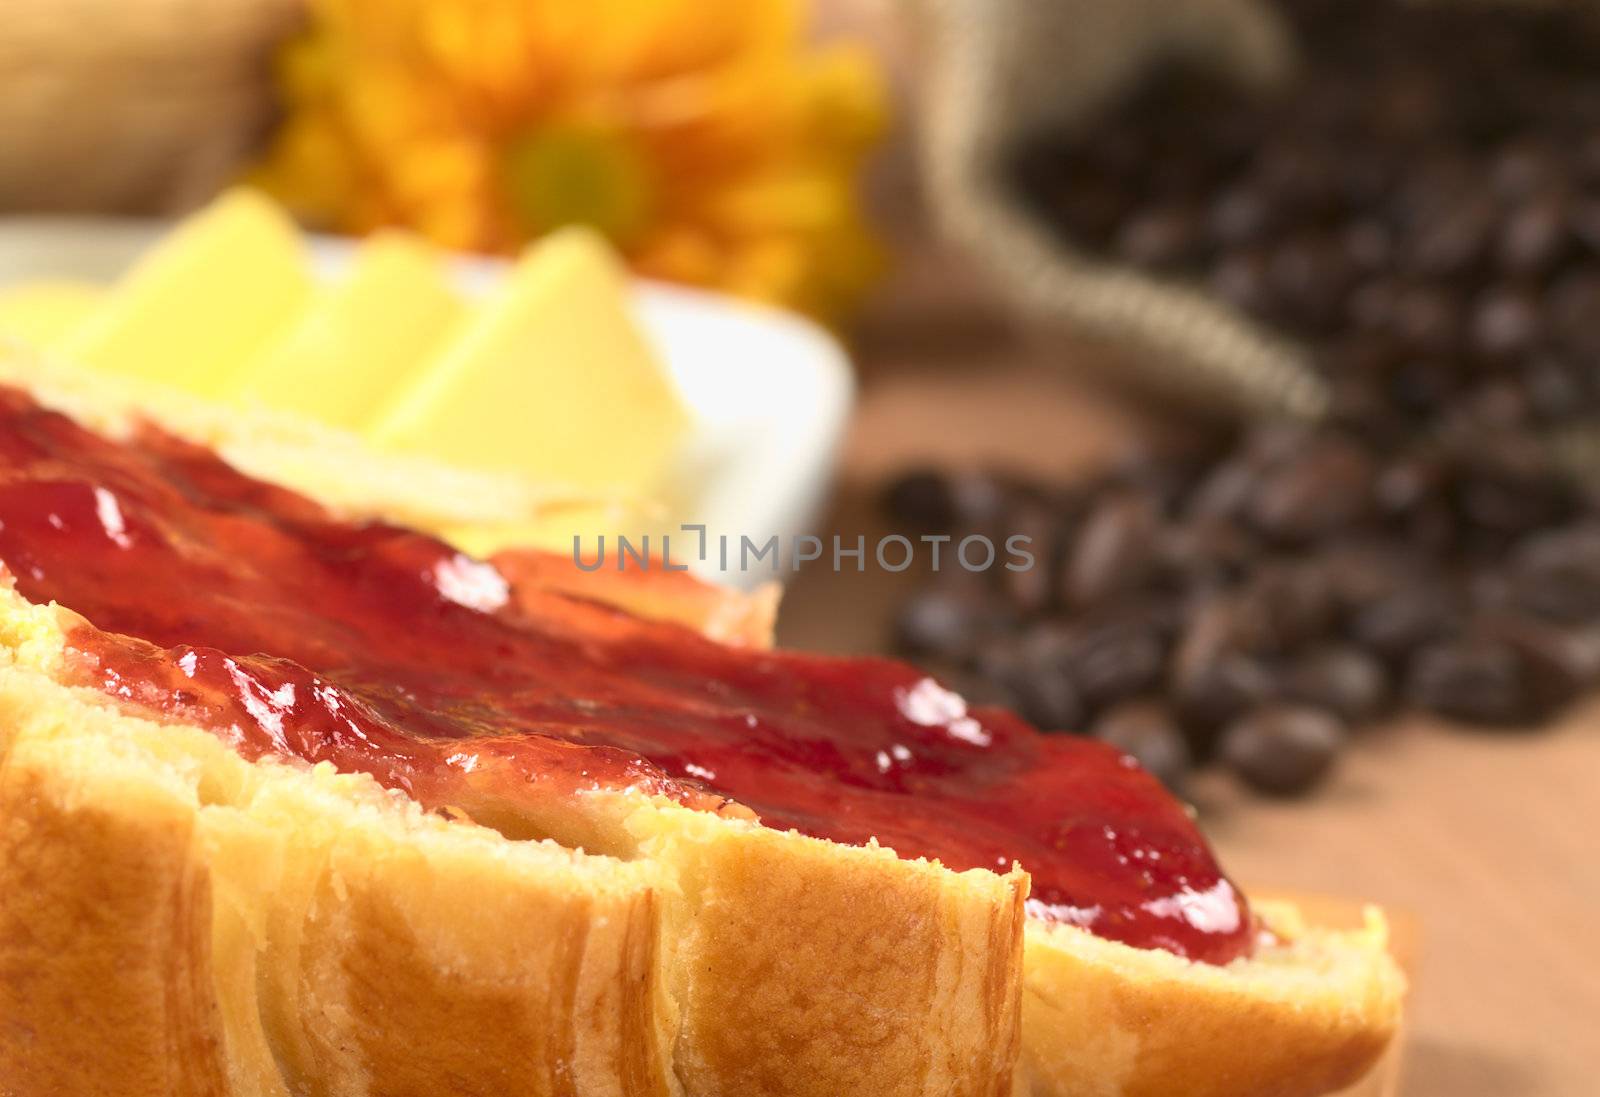 Strawberry jam spread on croissant with butter and coffee beans in the back (Selective Focus, Focus on the front of the spread jam)